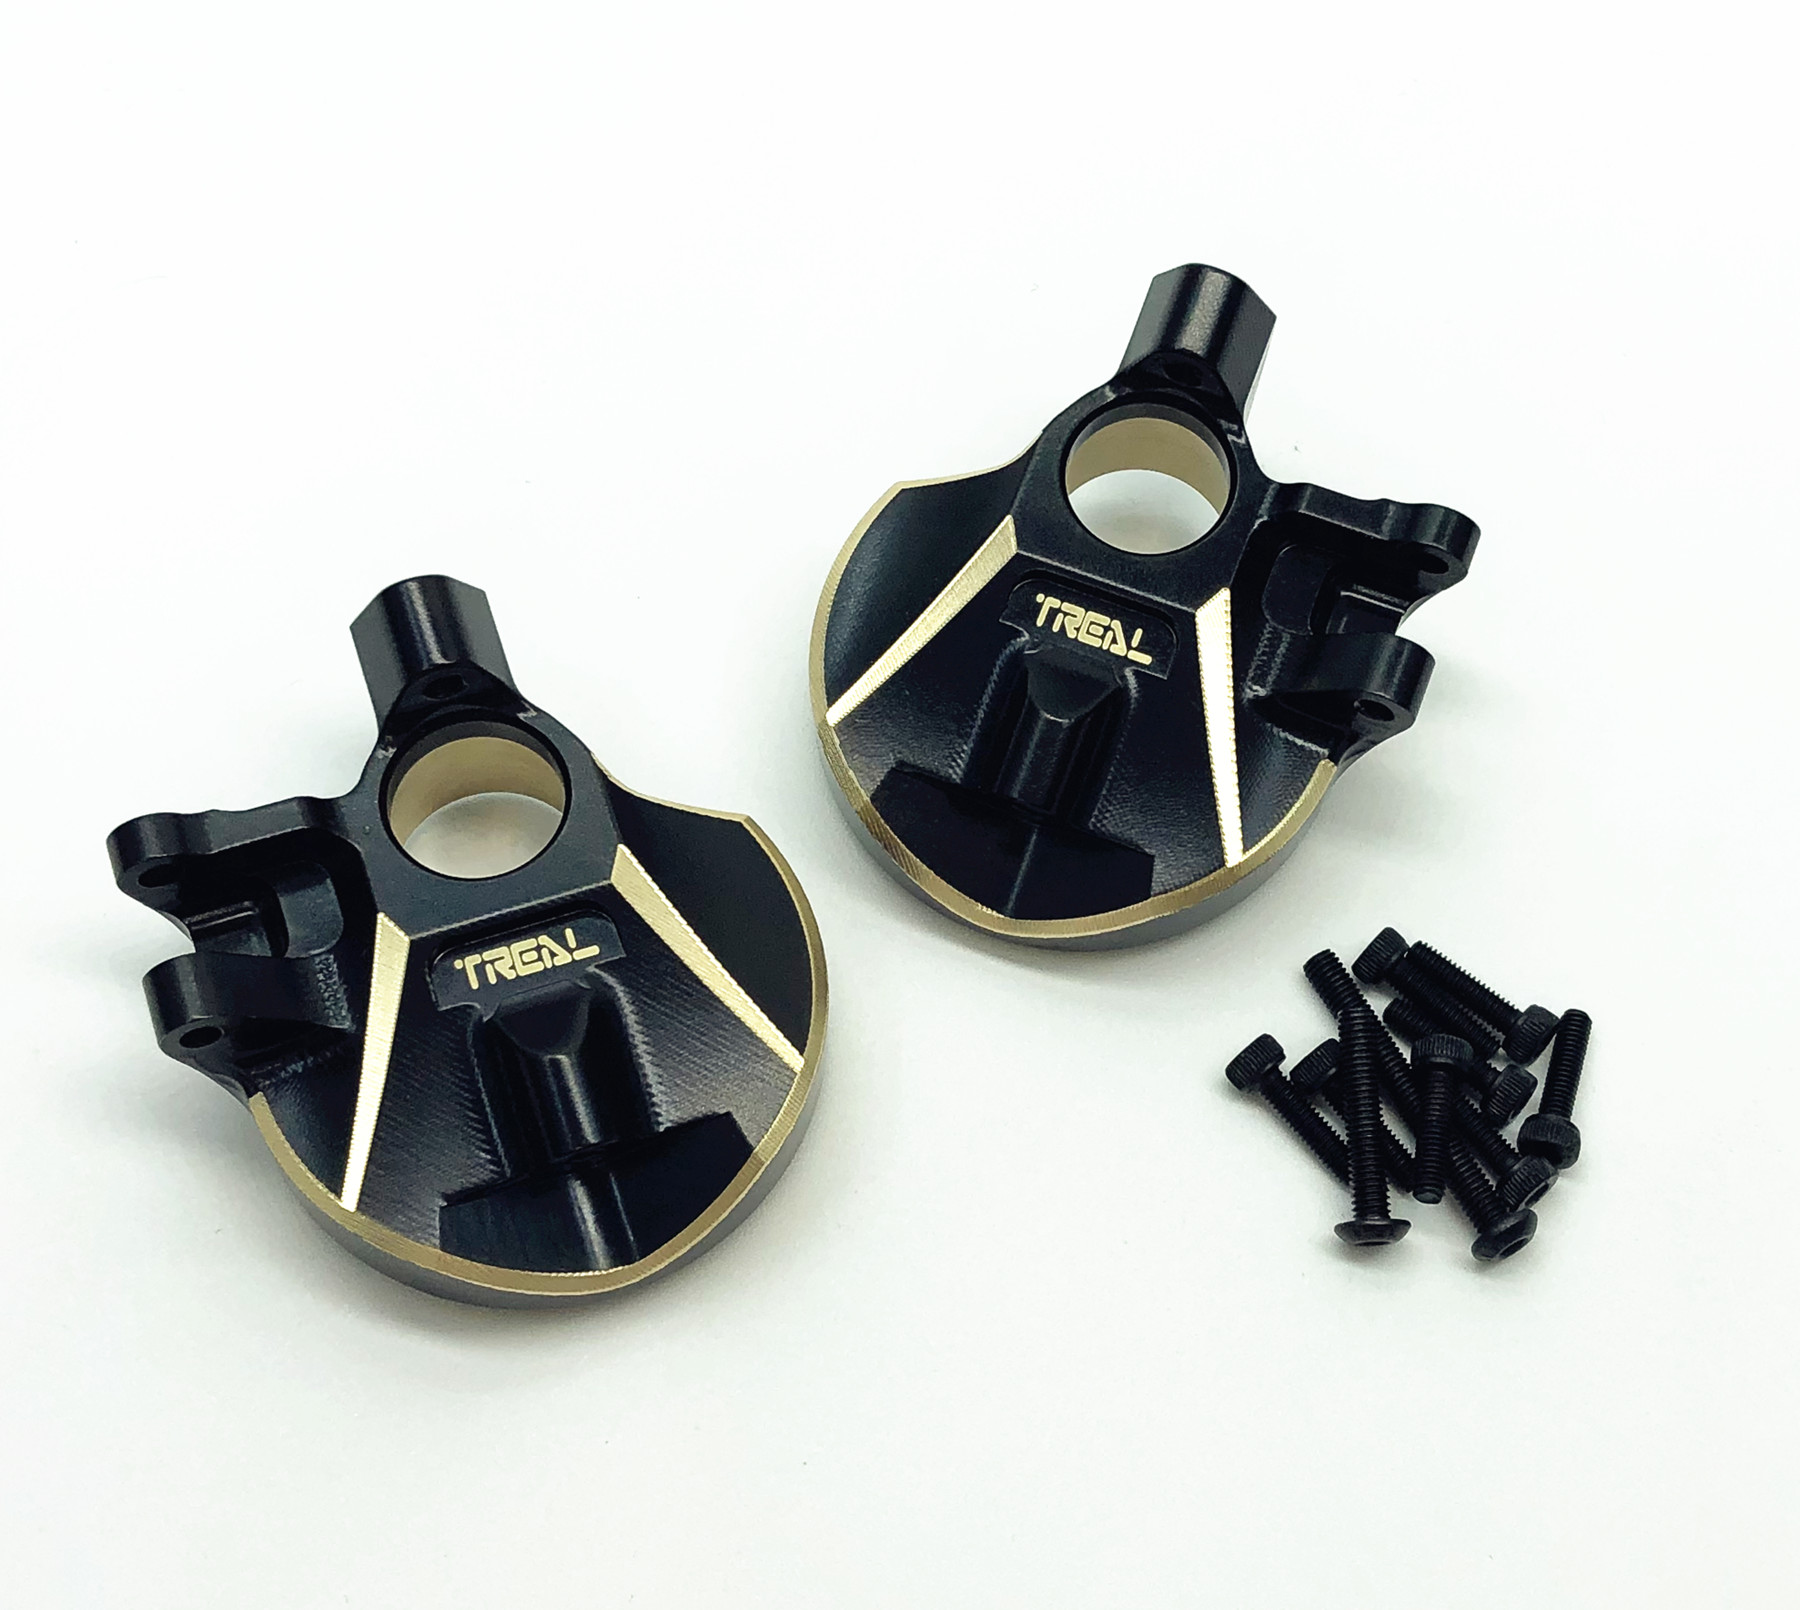 CNC Brass Currie F9 Portal Steering Knuckle Caps for Axial Capra 